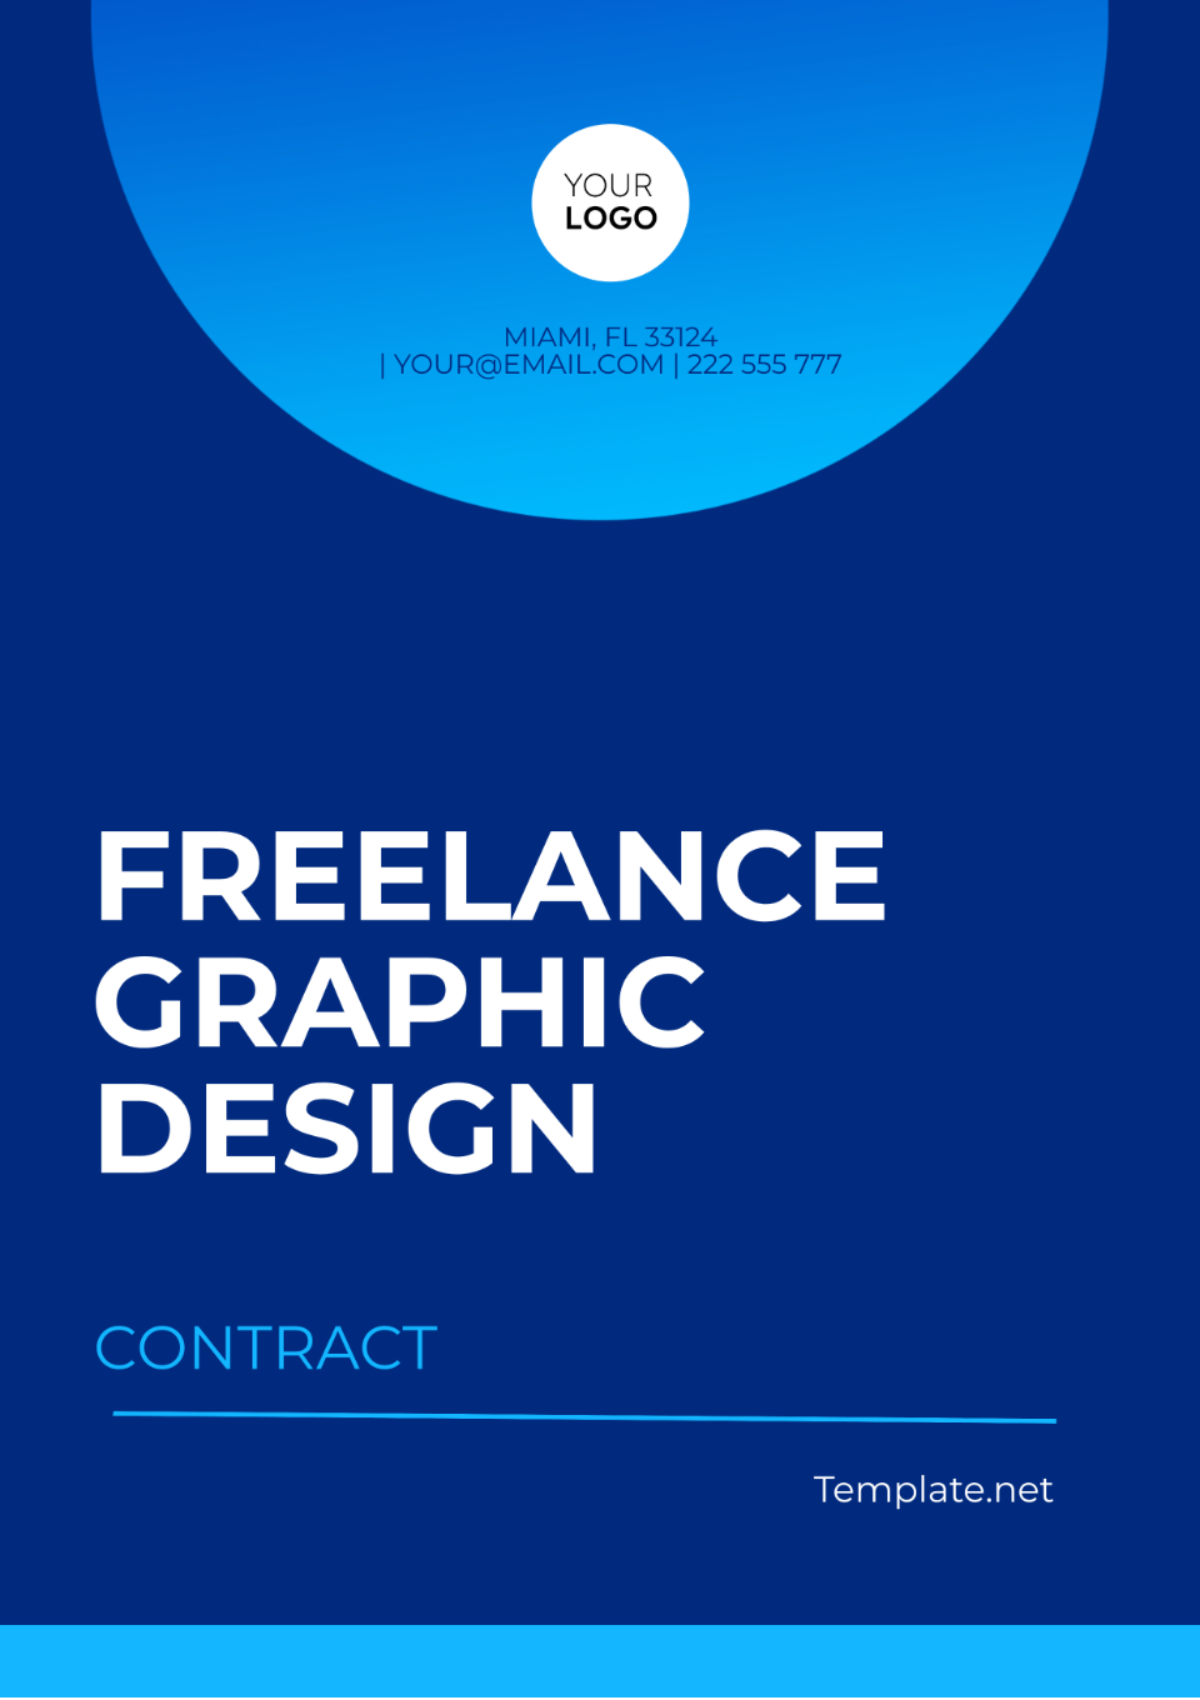 Freelance Graphic Design Contract Template